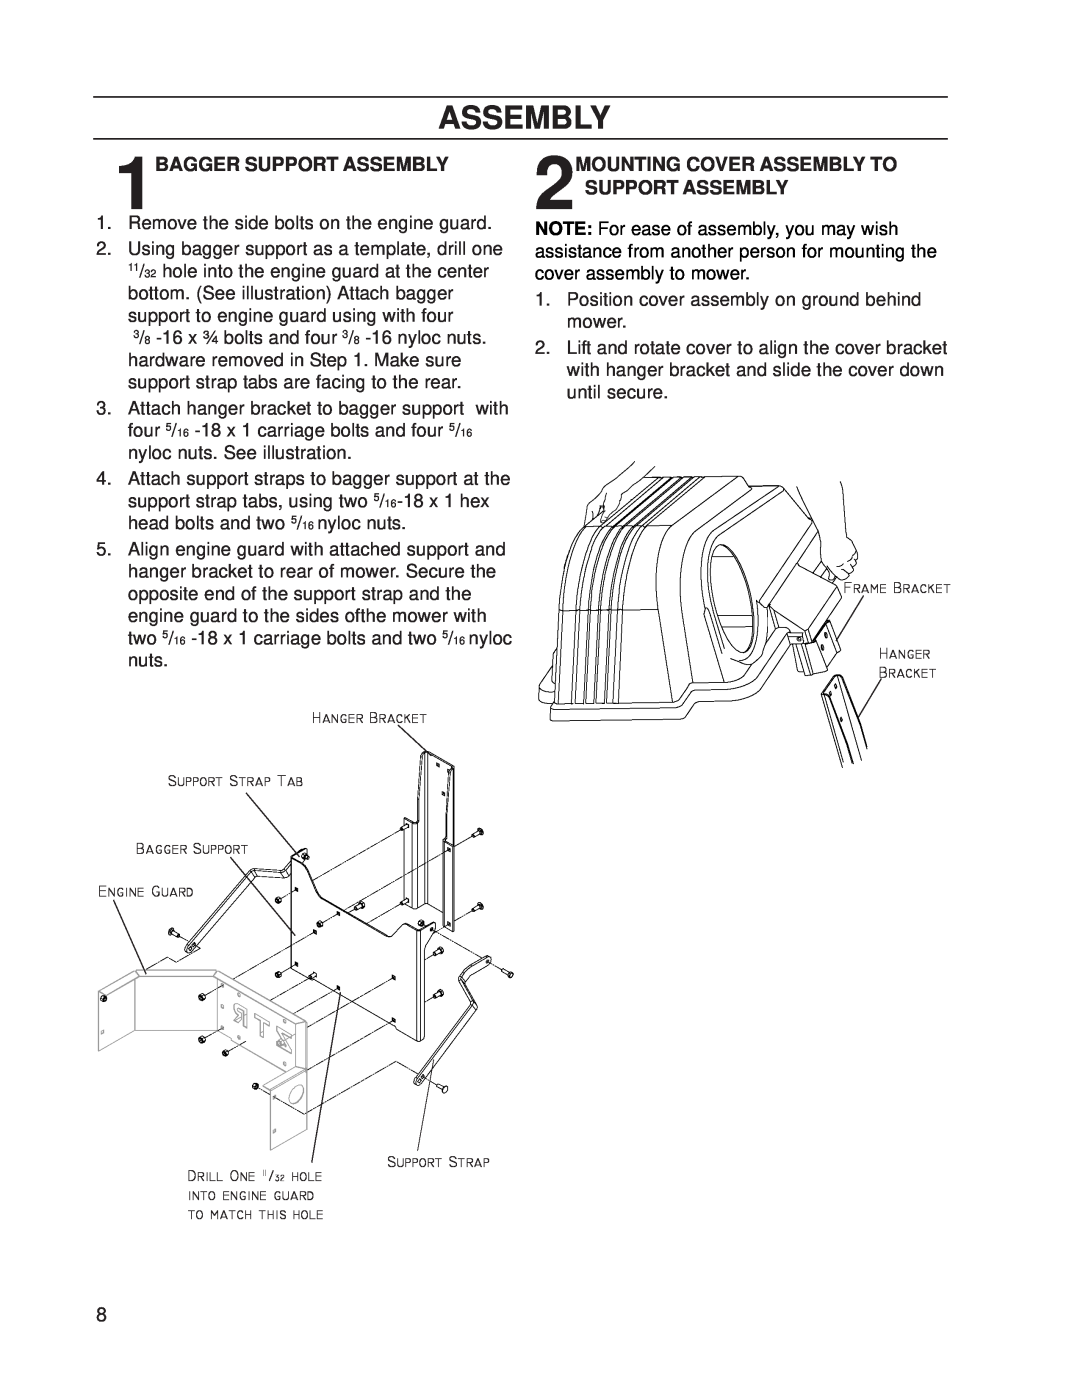 Dixon 539 131301 manual Assembly, 1BAGGER SUPPORT ASSEMBLY, 2MOUNTING COVER ASSEMBLY TO SUPPORT ASSEMBLY 